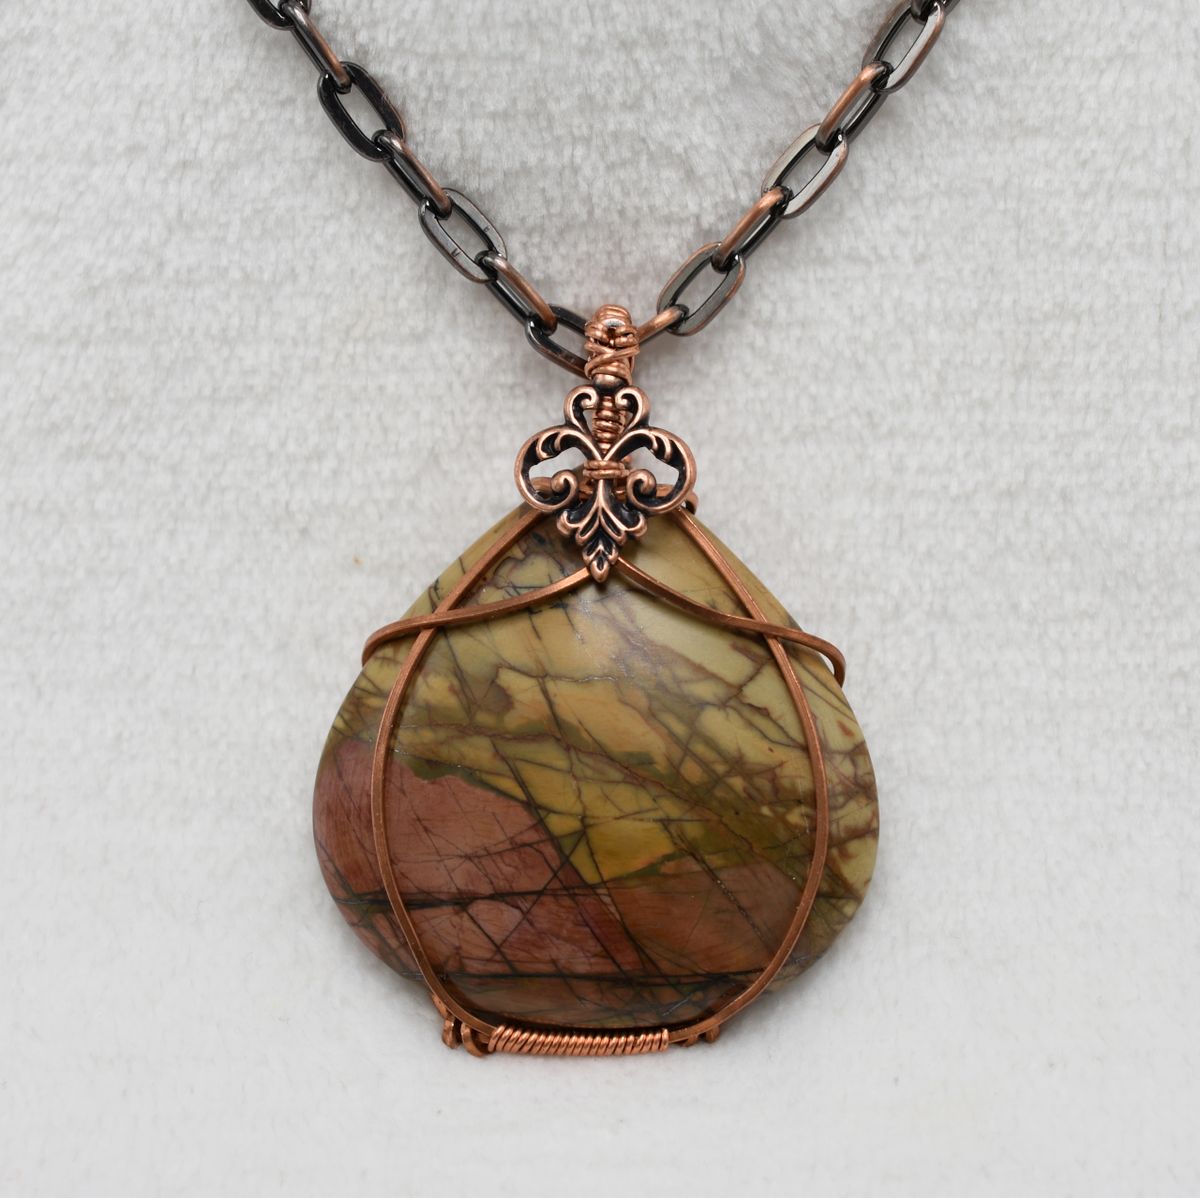 Red Creek Jasper Stone Pendant on Oxidized Copper Chain Necklace - Earthy Natural Gemstone Jewelry